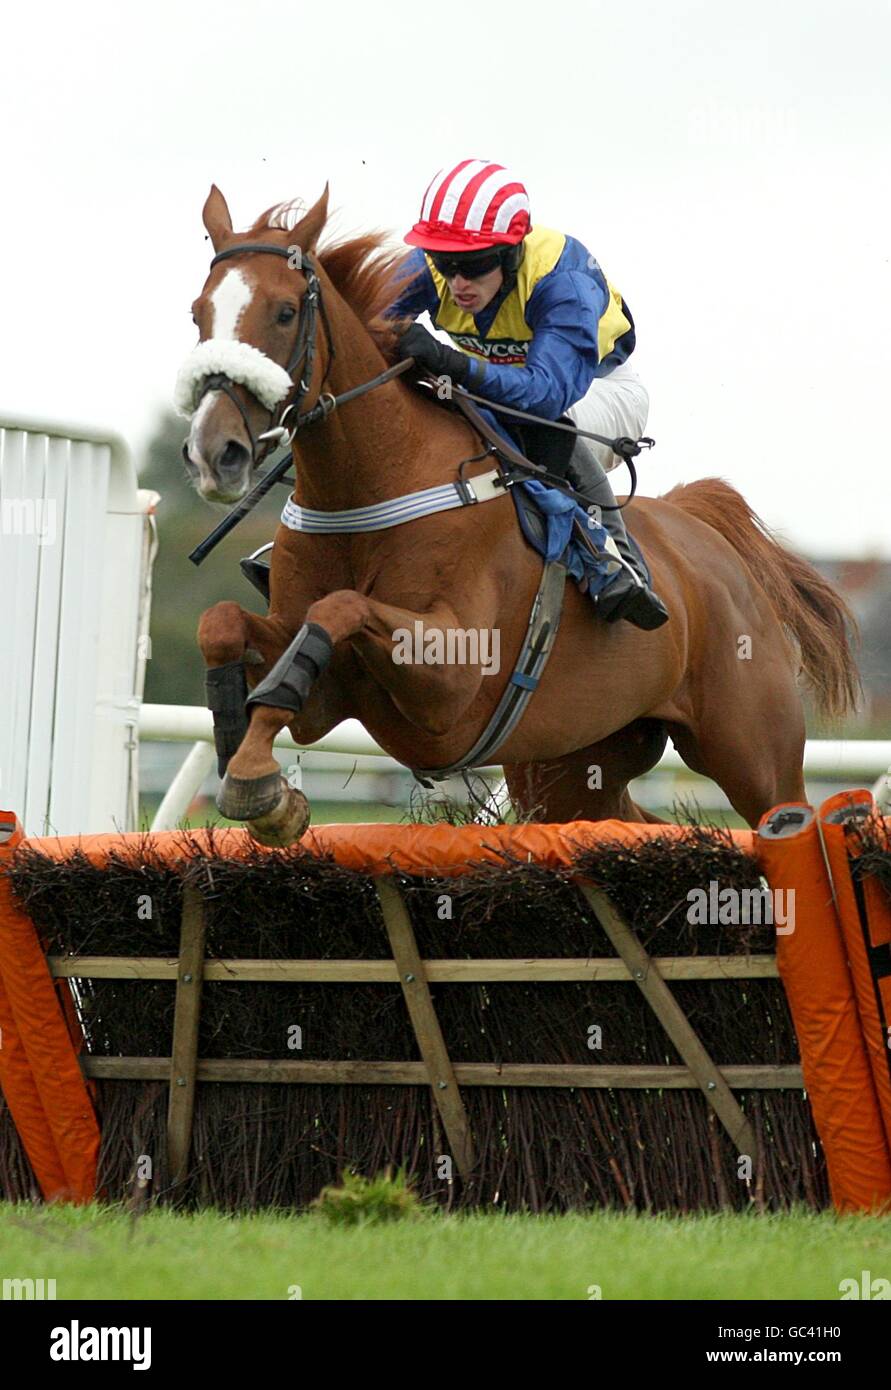 Mayfair Tambourine, ridden by Dave Crousse, during the Leukaemia Care Handicap Hurdle Race at Hereford Racecourse Stock Photo